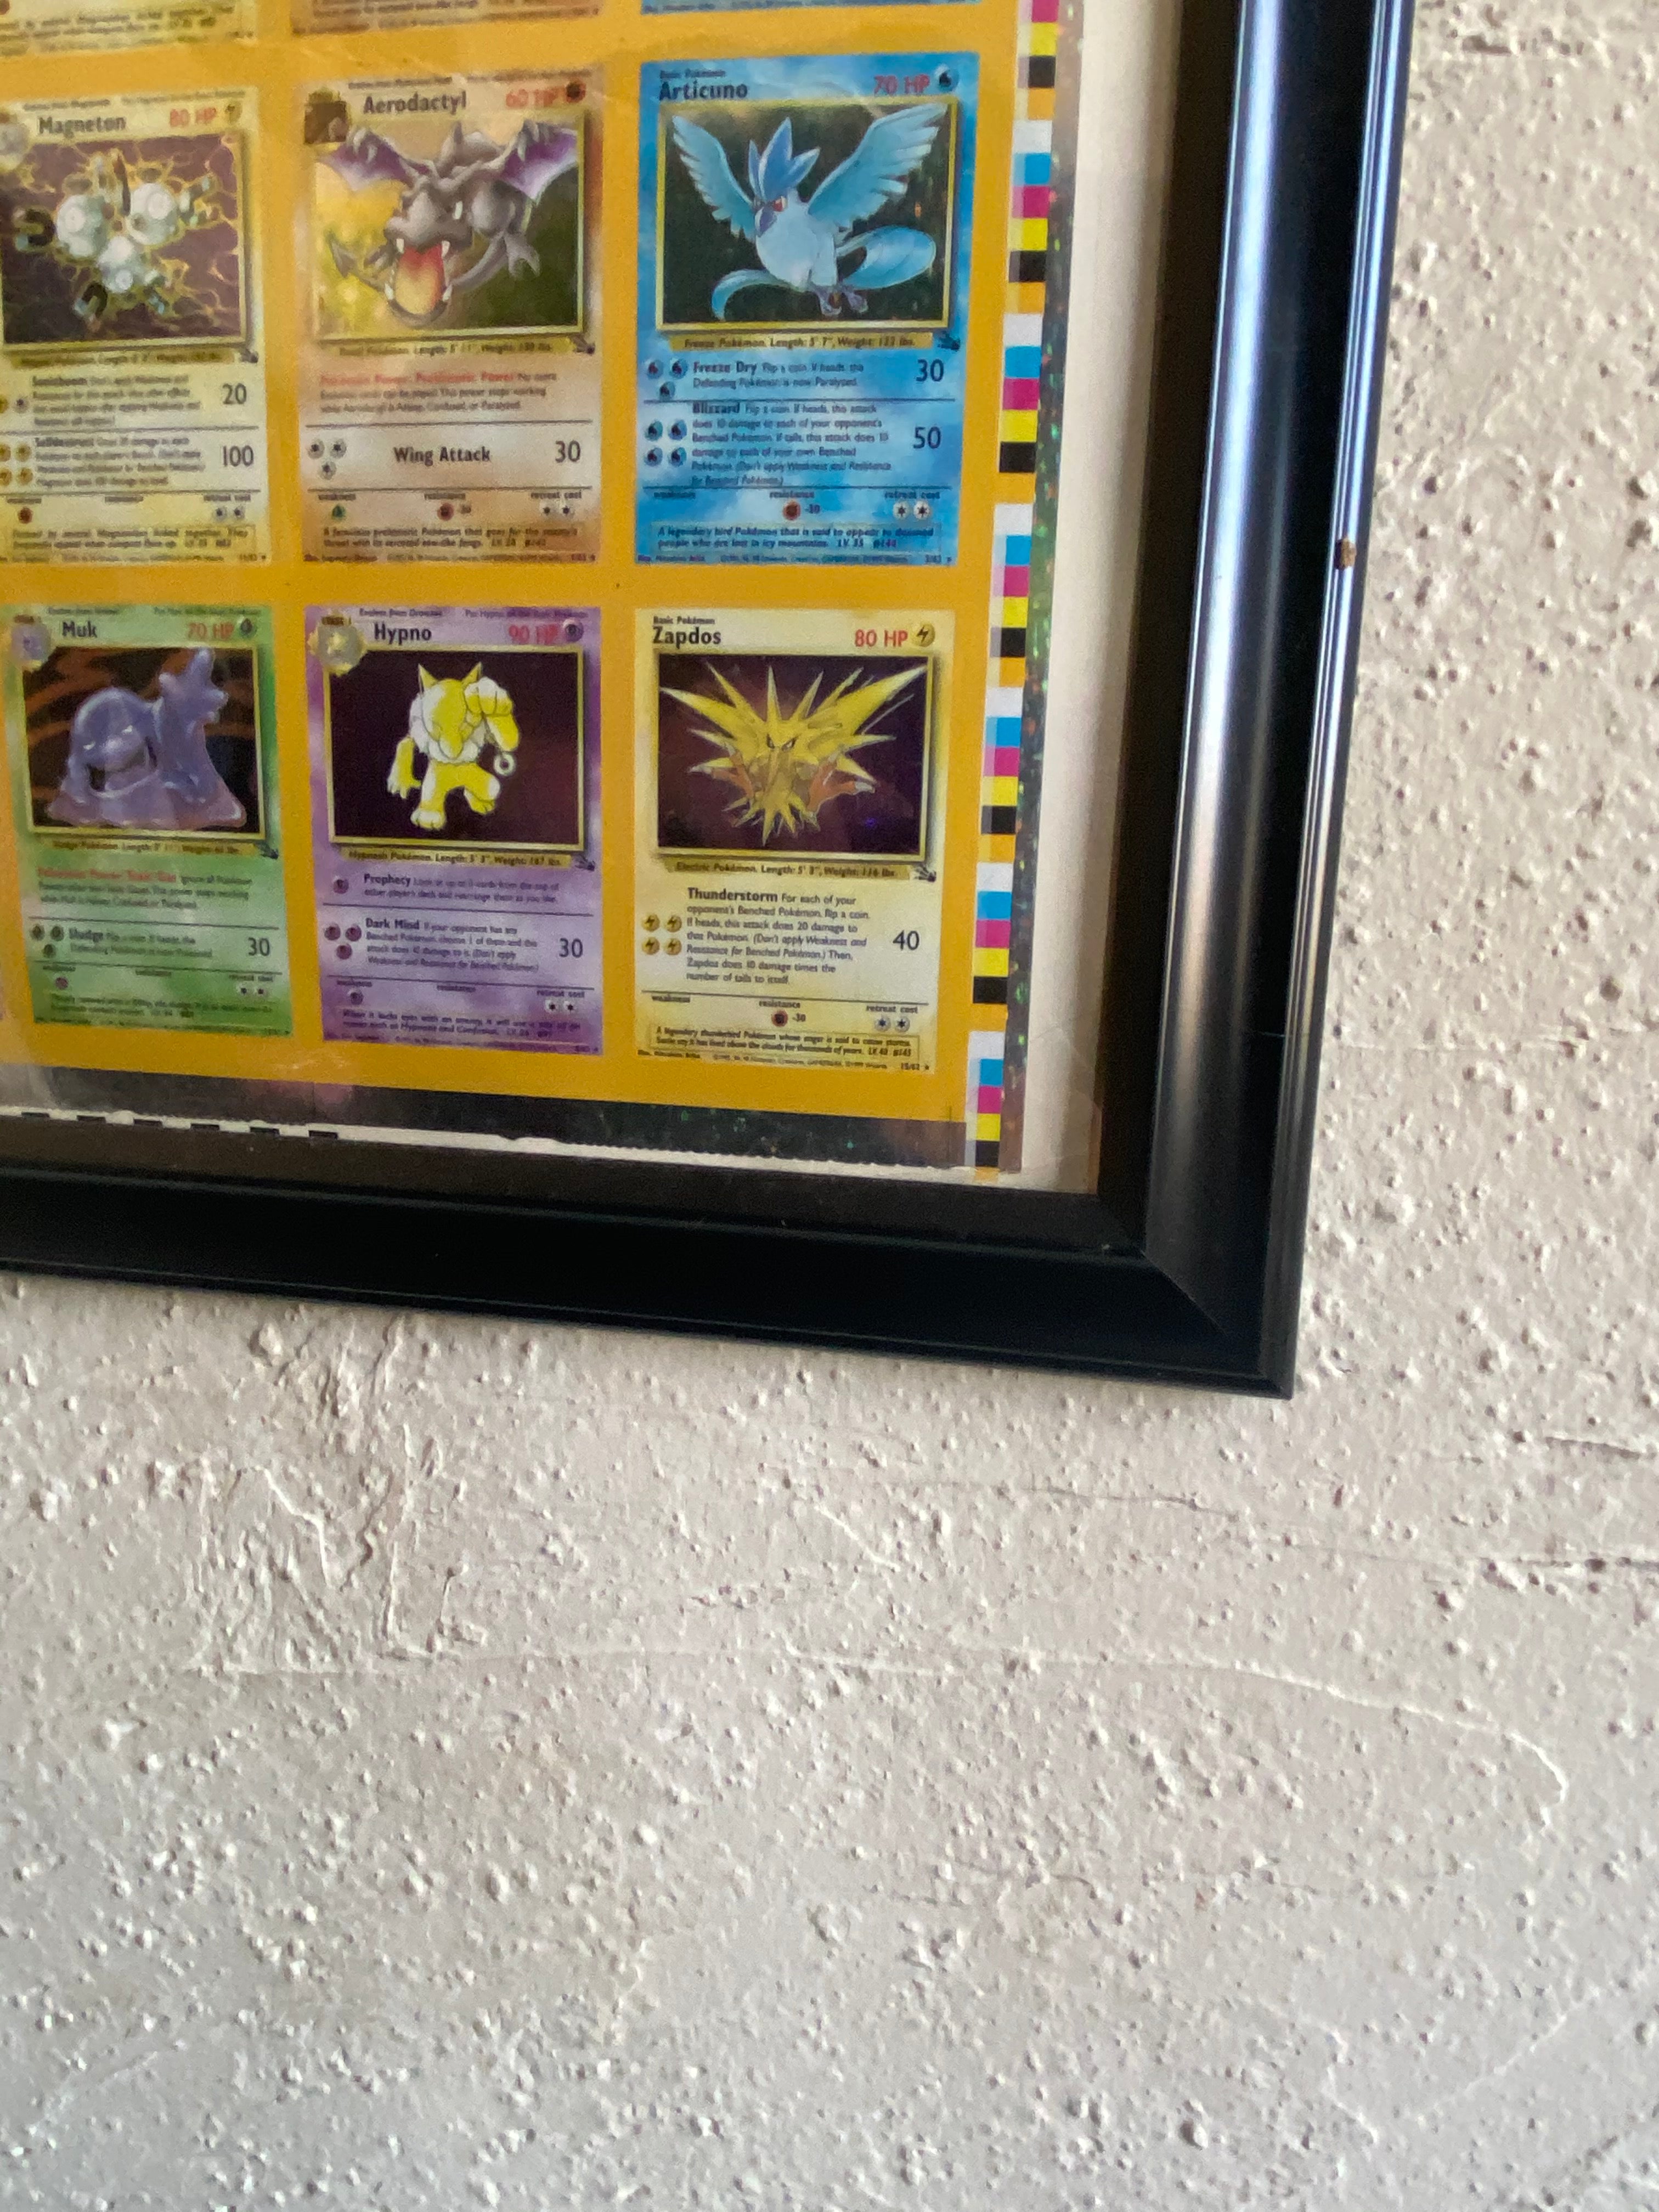 Pokemon Fossil Holo Rare Uncut Sheet 1 of 99 (110 Cards) Wizards of the Coast Kay Bee Toys FRAMED